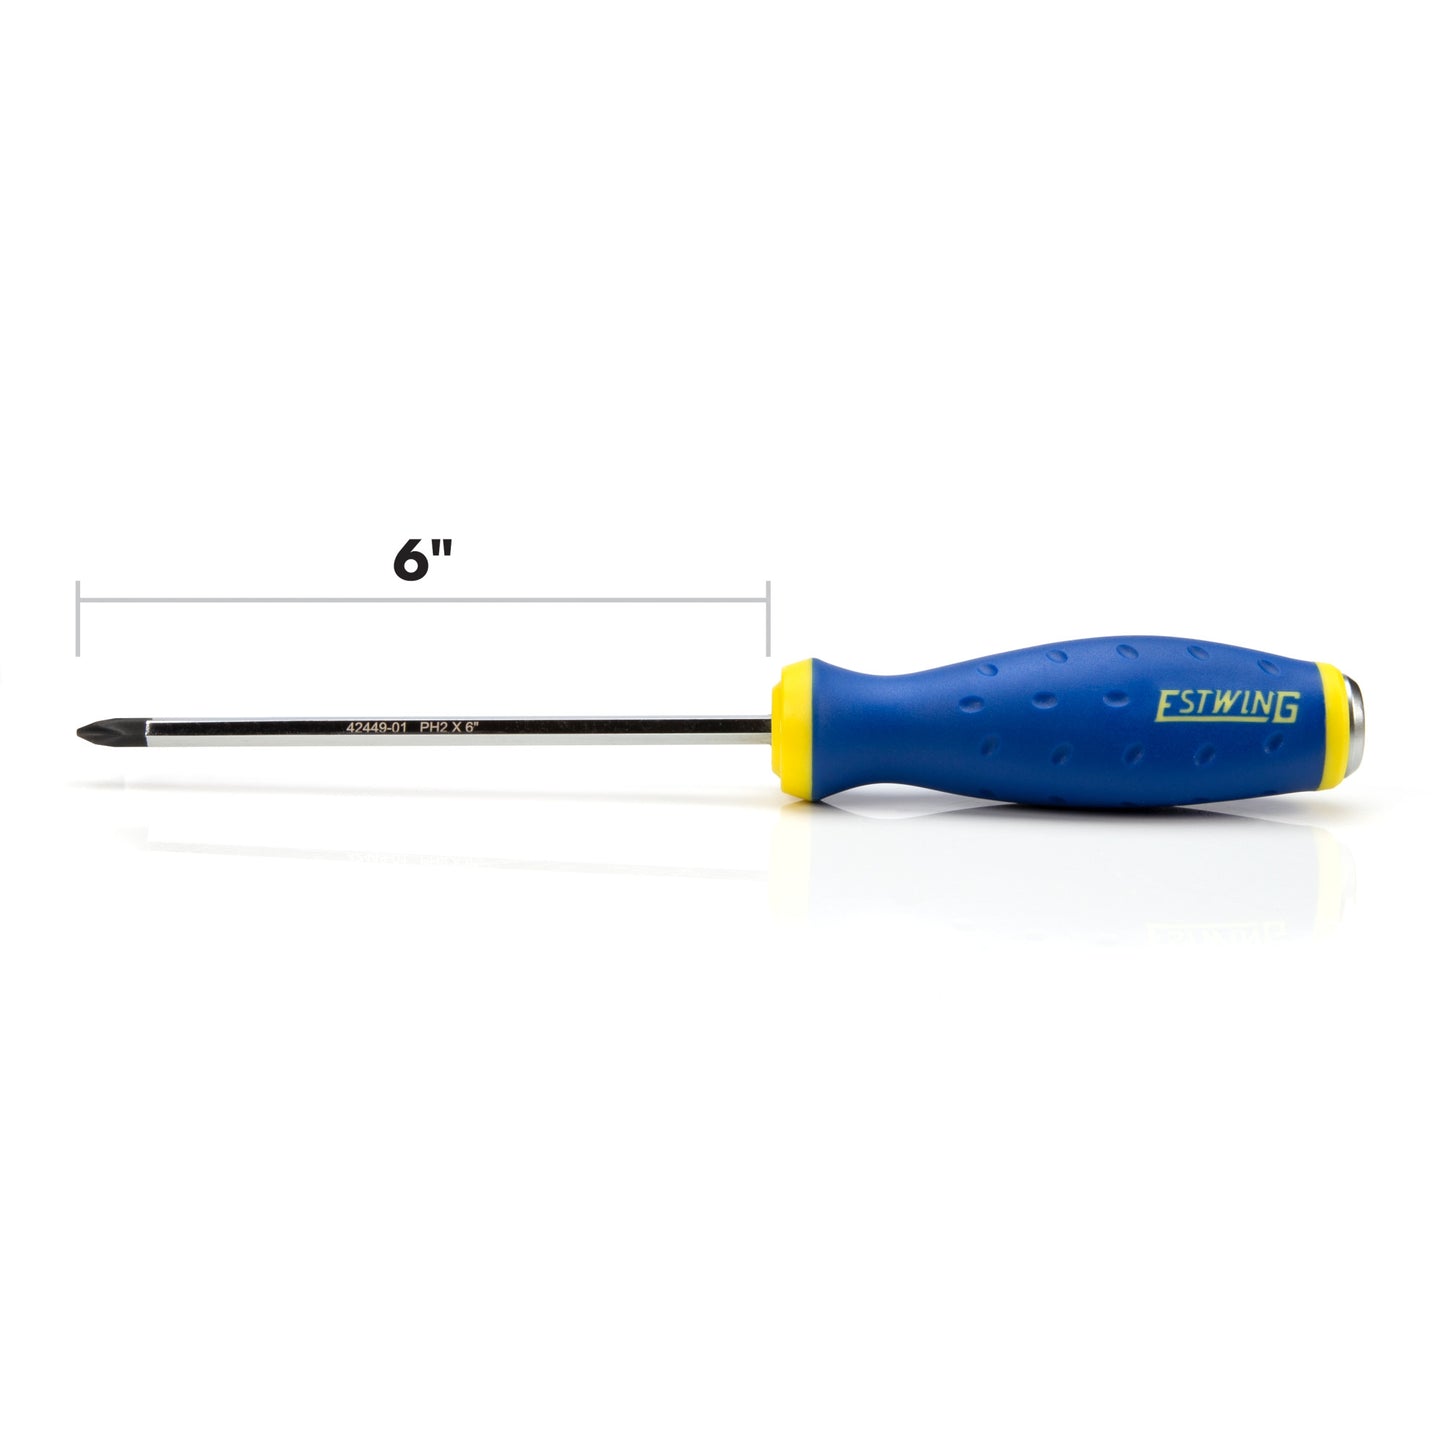 PH2 x 6-Inch Philips Head Heavy Duty Hex Shaft Demolition Screwdriver with Magnetic Tip